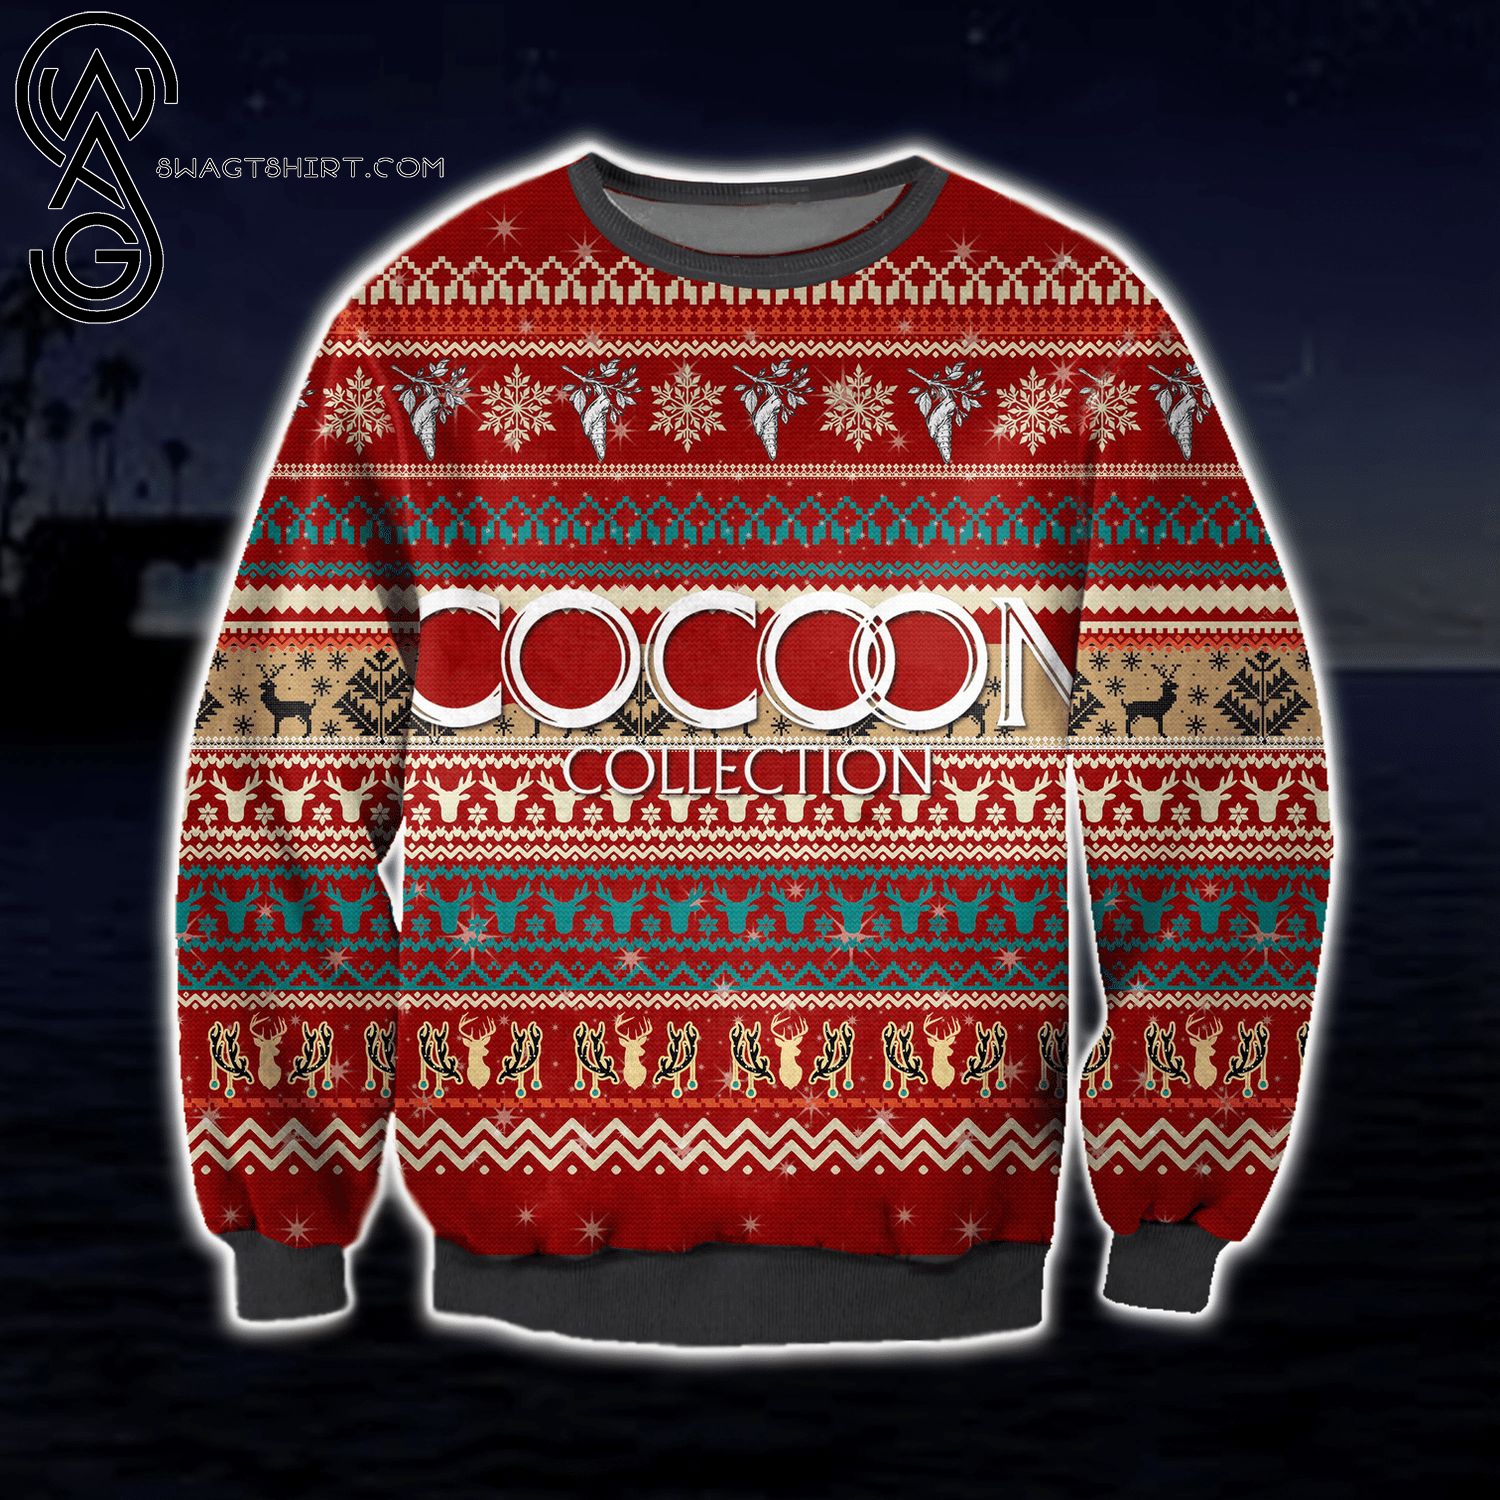 Cocoon Collection Full Print Ugly Christmas Sweater